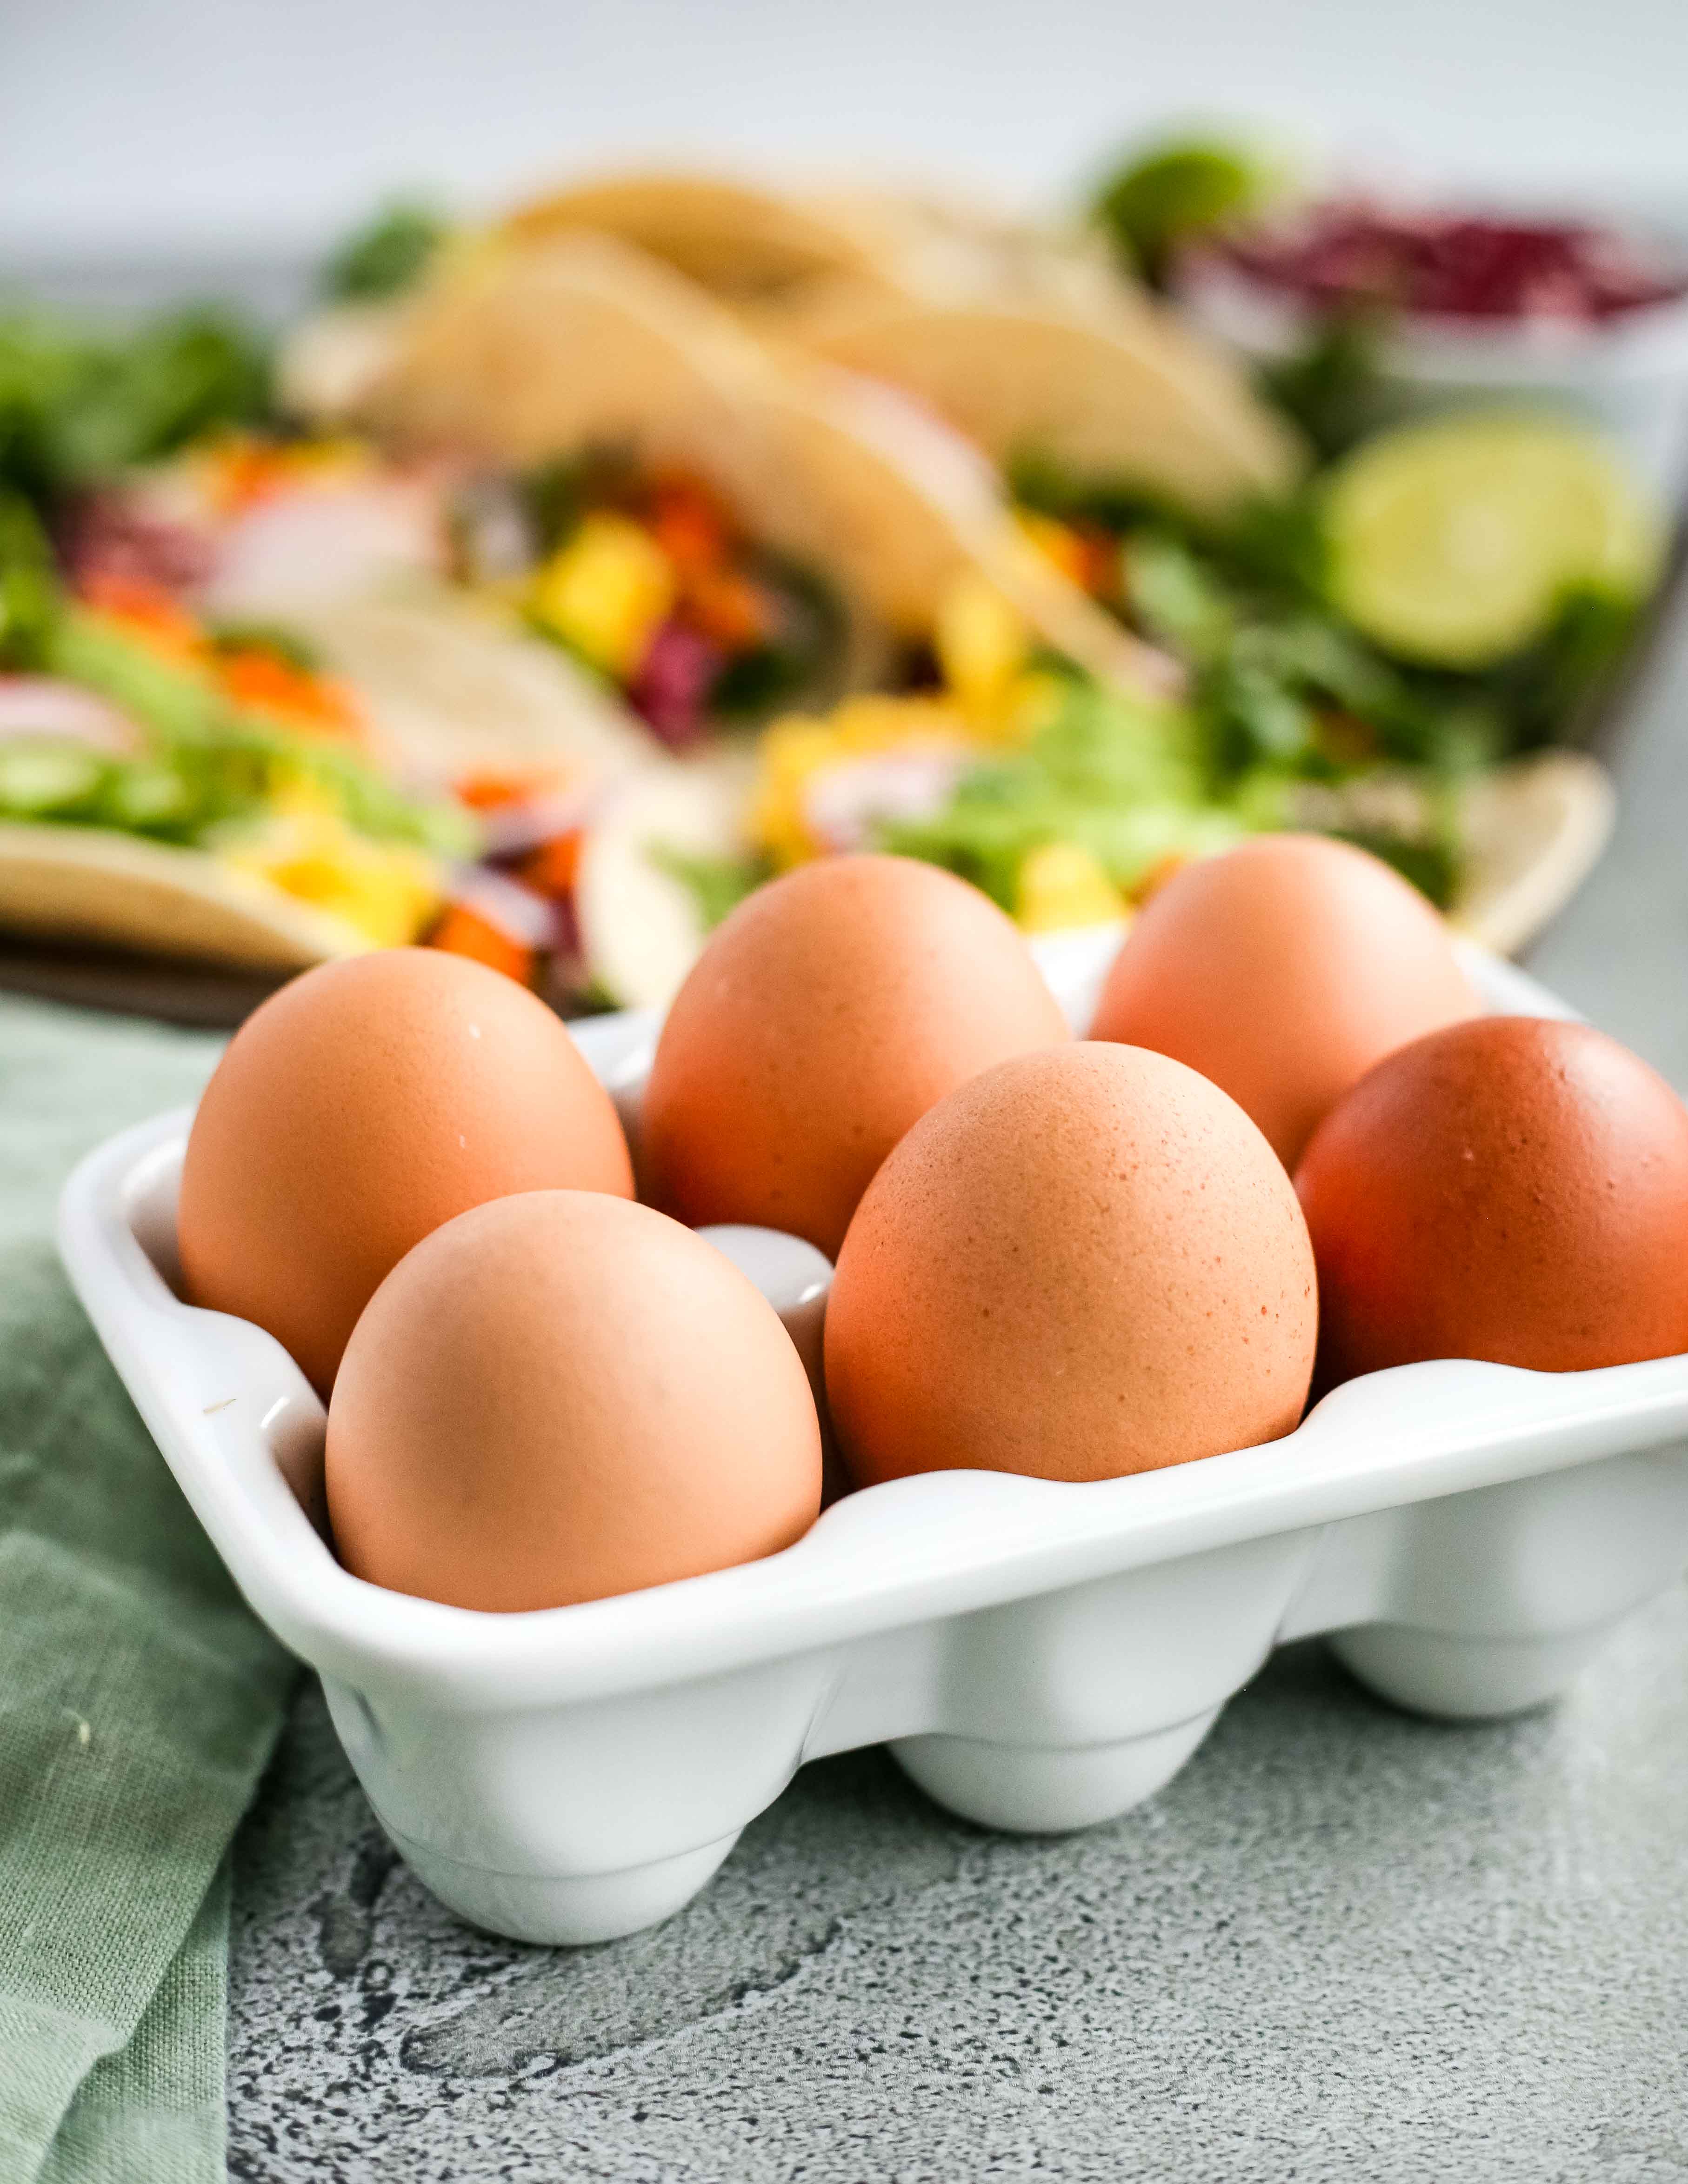 Brown eggs in a white ceramic egg holder in front of colorful breakfast tacos on a kitchen countertop